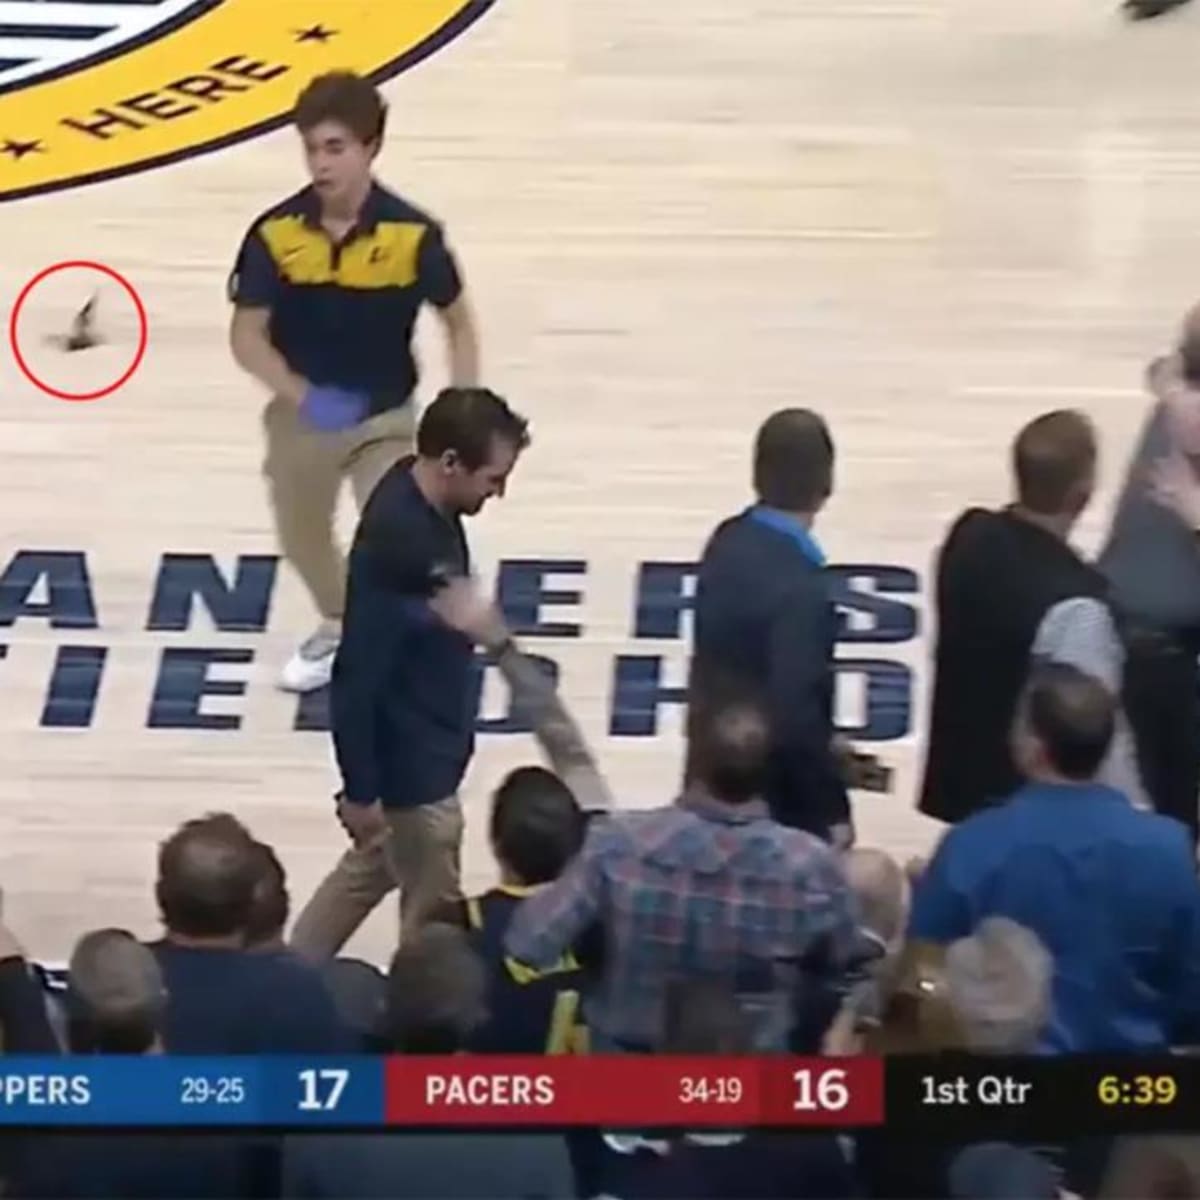 Bat At Indiana Pacers Game: Who Should Worry About Rabies